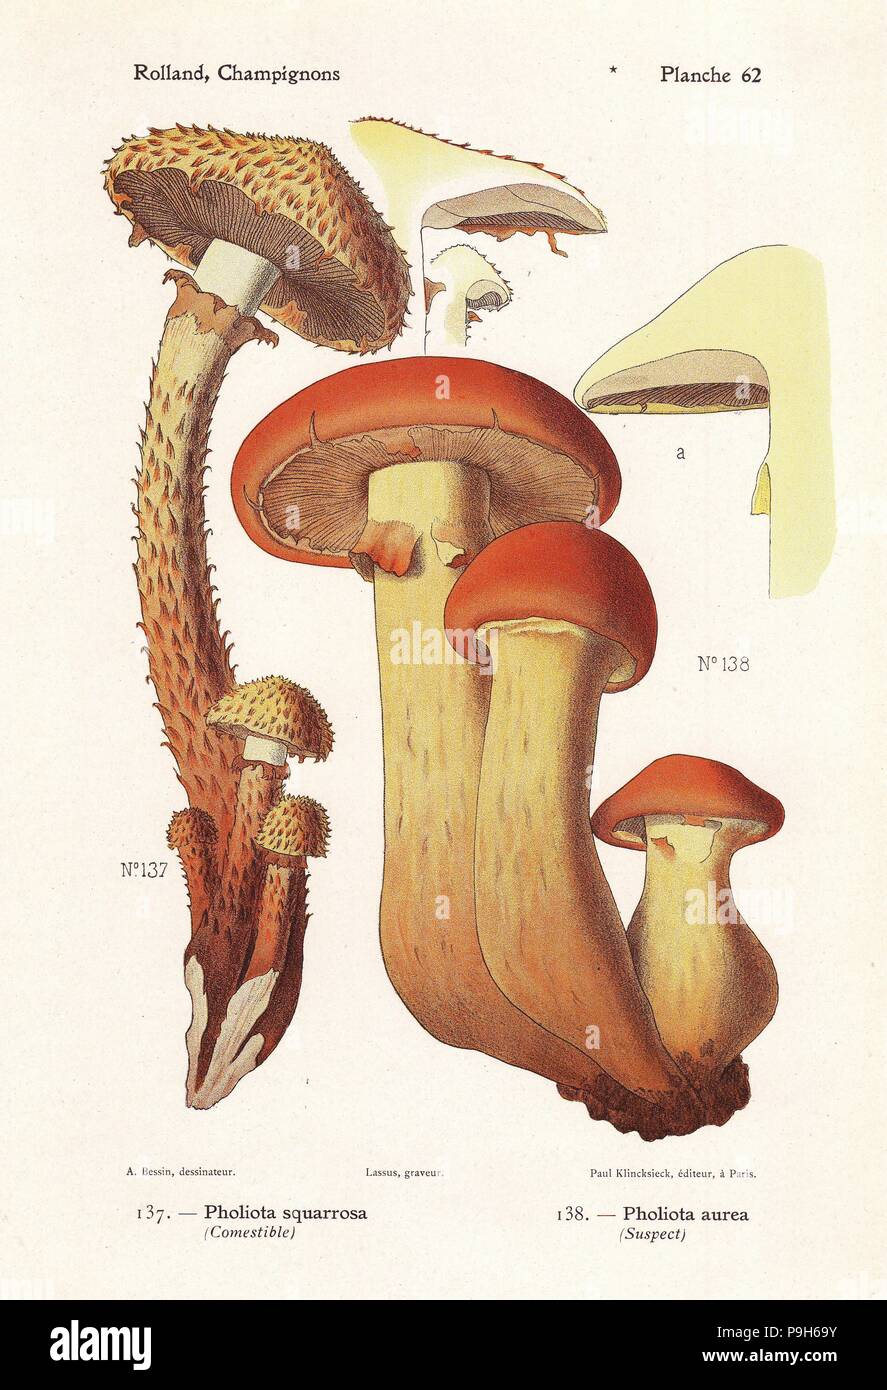 Shaggy scalycap, Pholiota squarrosa, and golden pholiota, Pholiota aurea. Chromolithograph by Lassus after an illustration by A. Bessin from Leon Rolland's Guide to Mushrooms from France, Switzerland and Belgium, Atlas des Champignons, Paul Klincksieck, Paris, 1910. Stock Photo